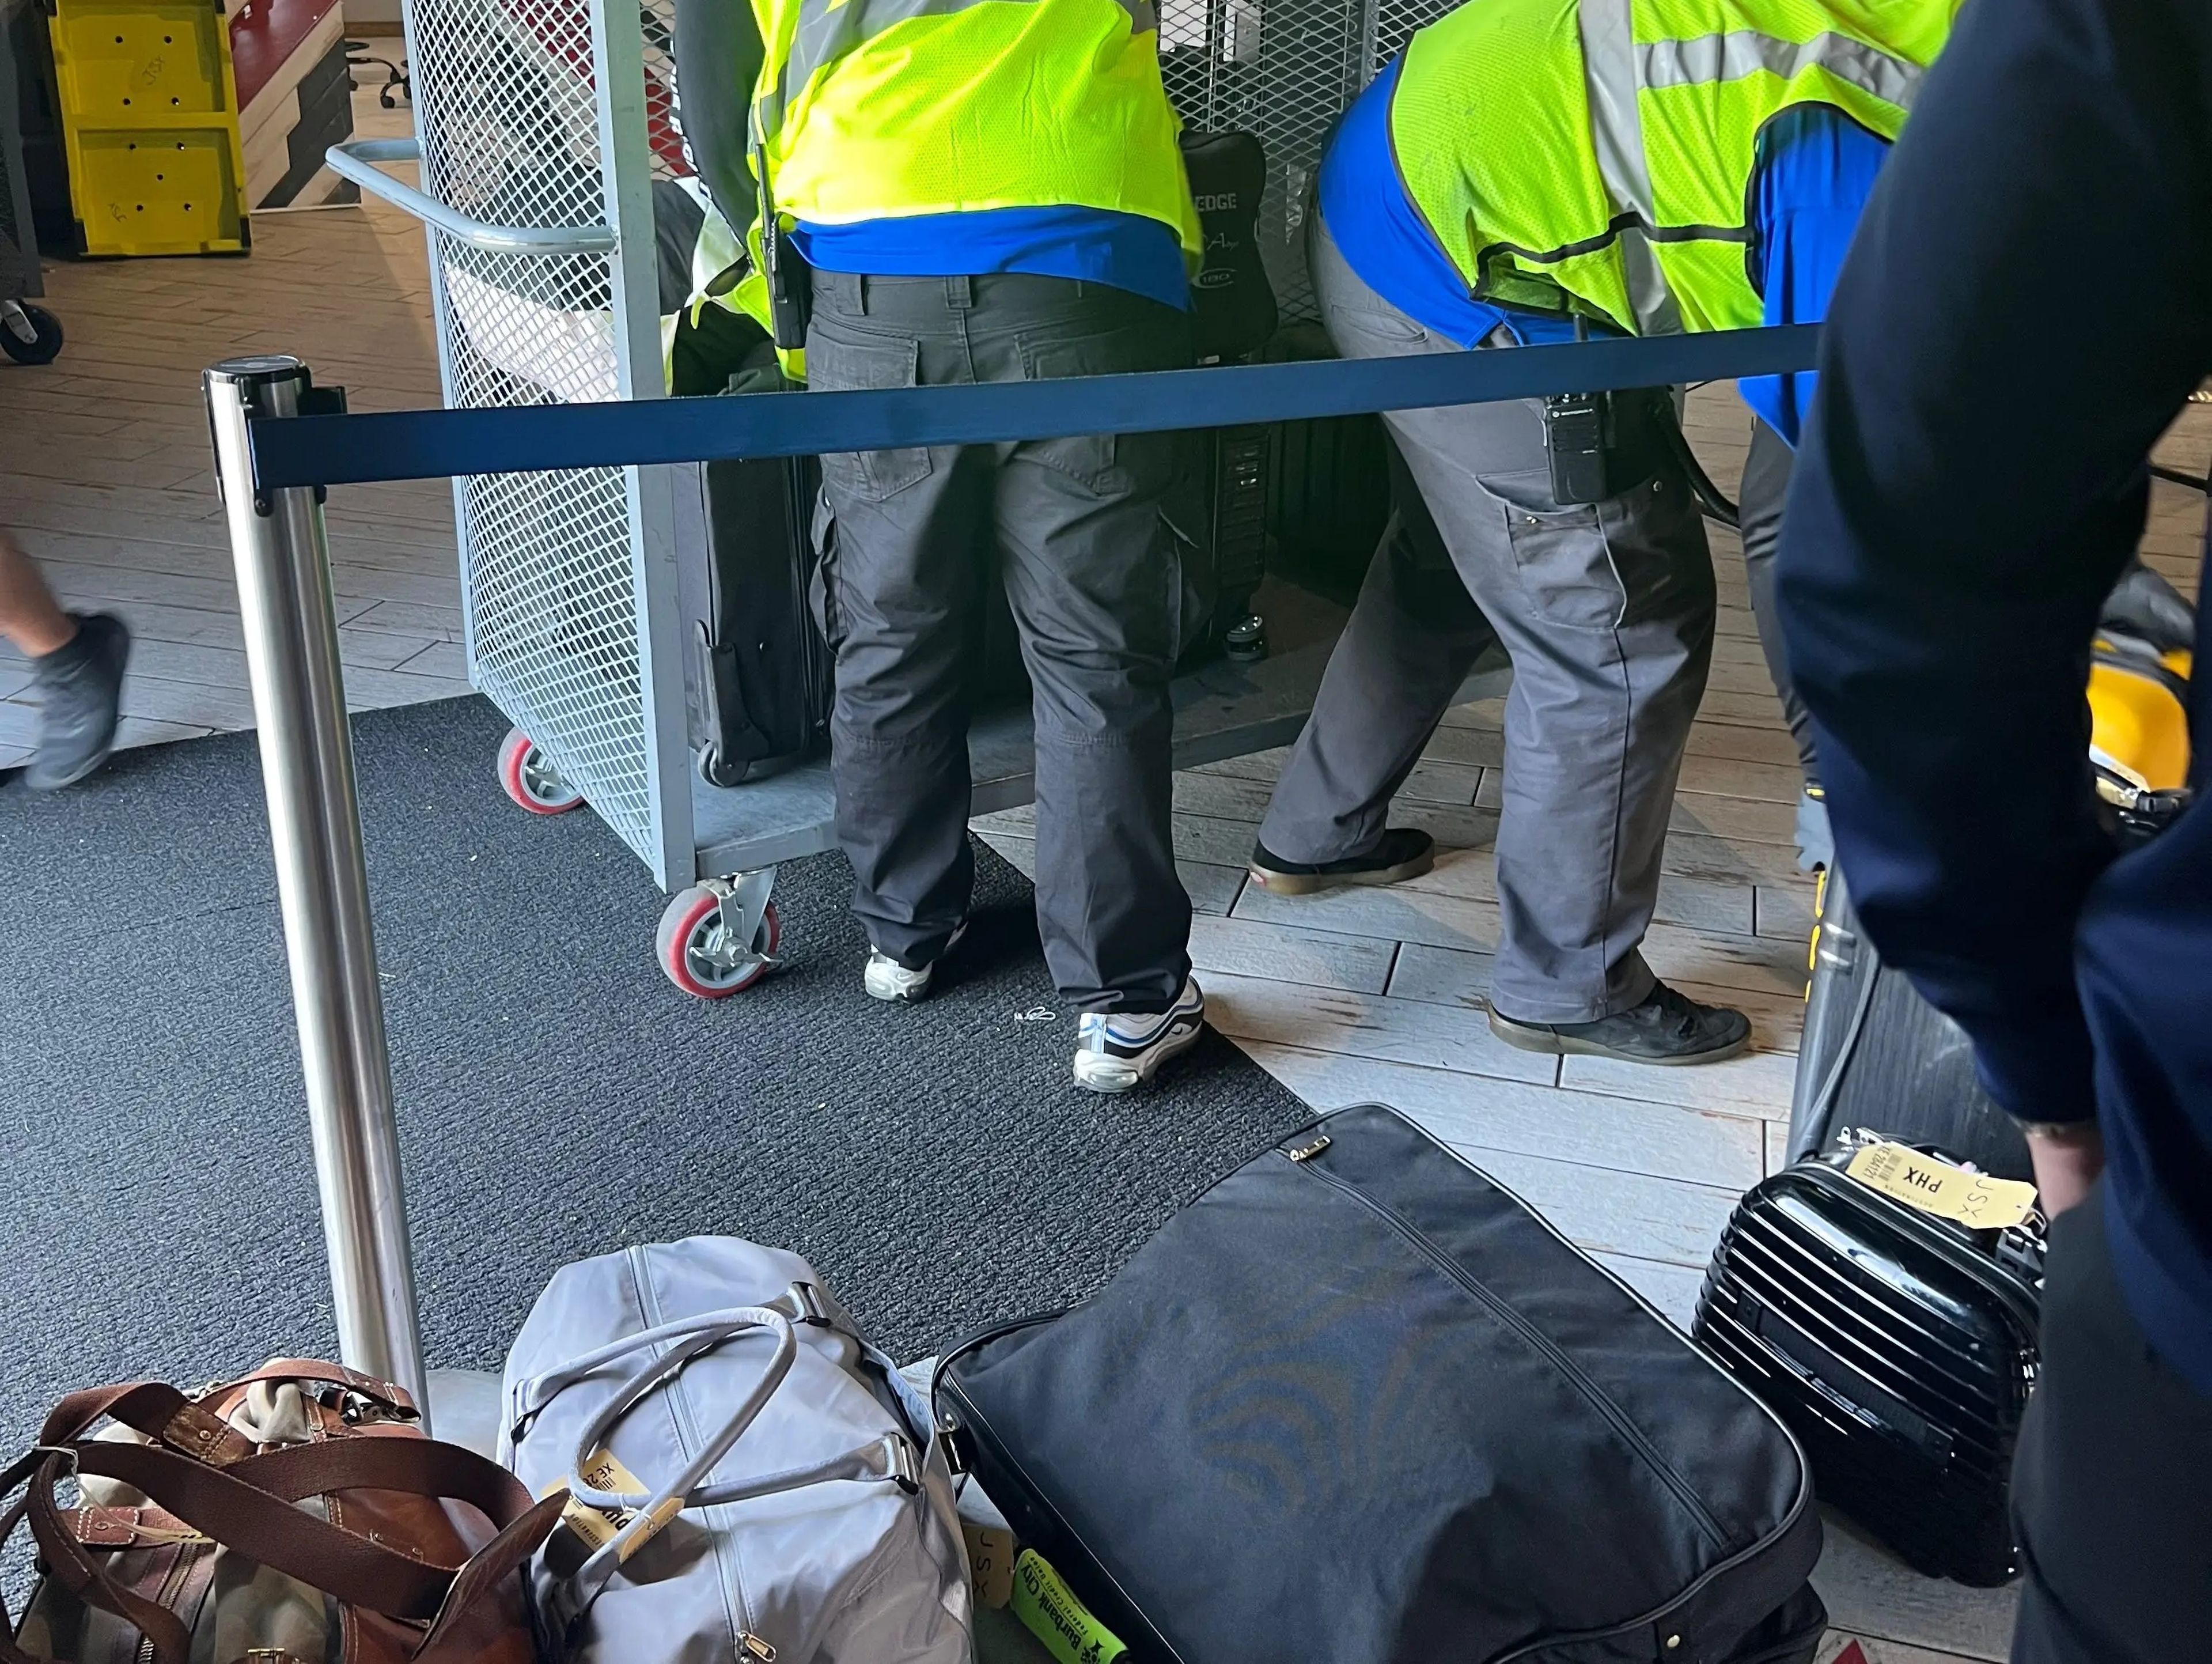 Ground crew in yellow vests standing behind a barrier while unloading luggage from a metal trolley.